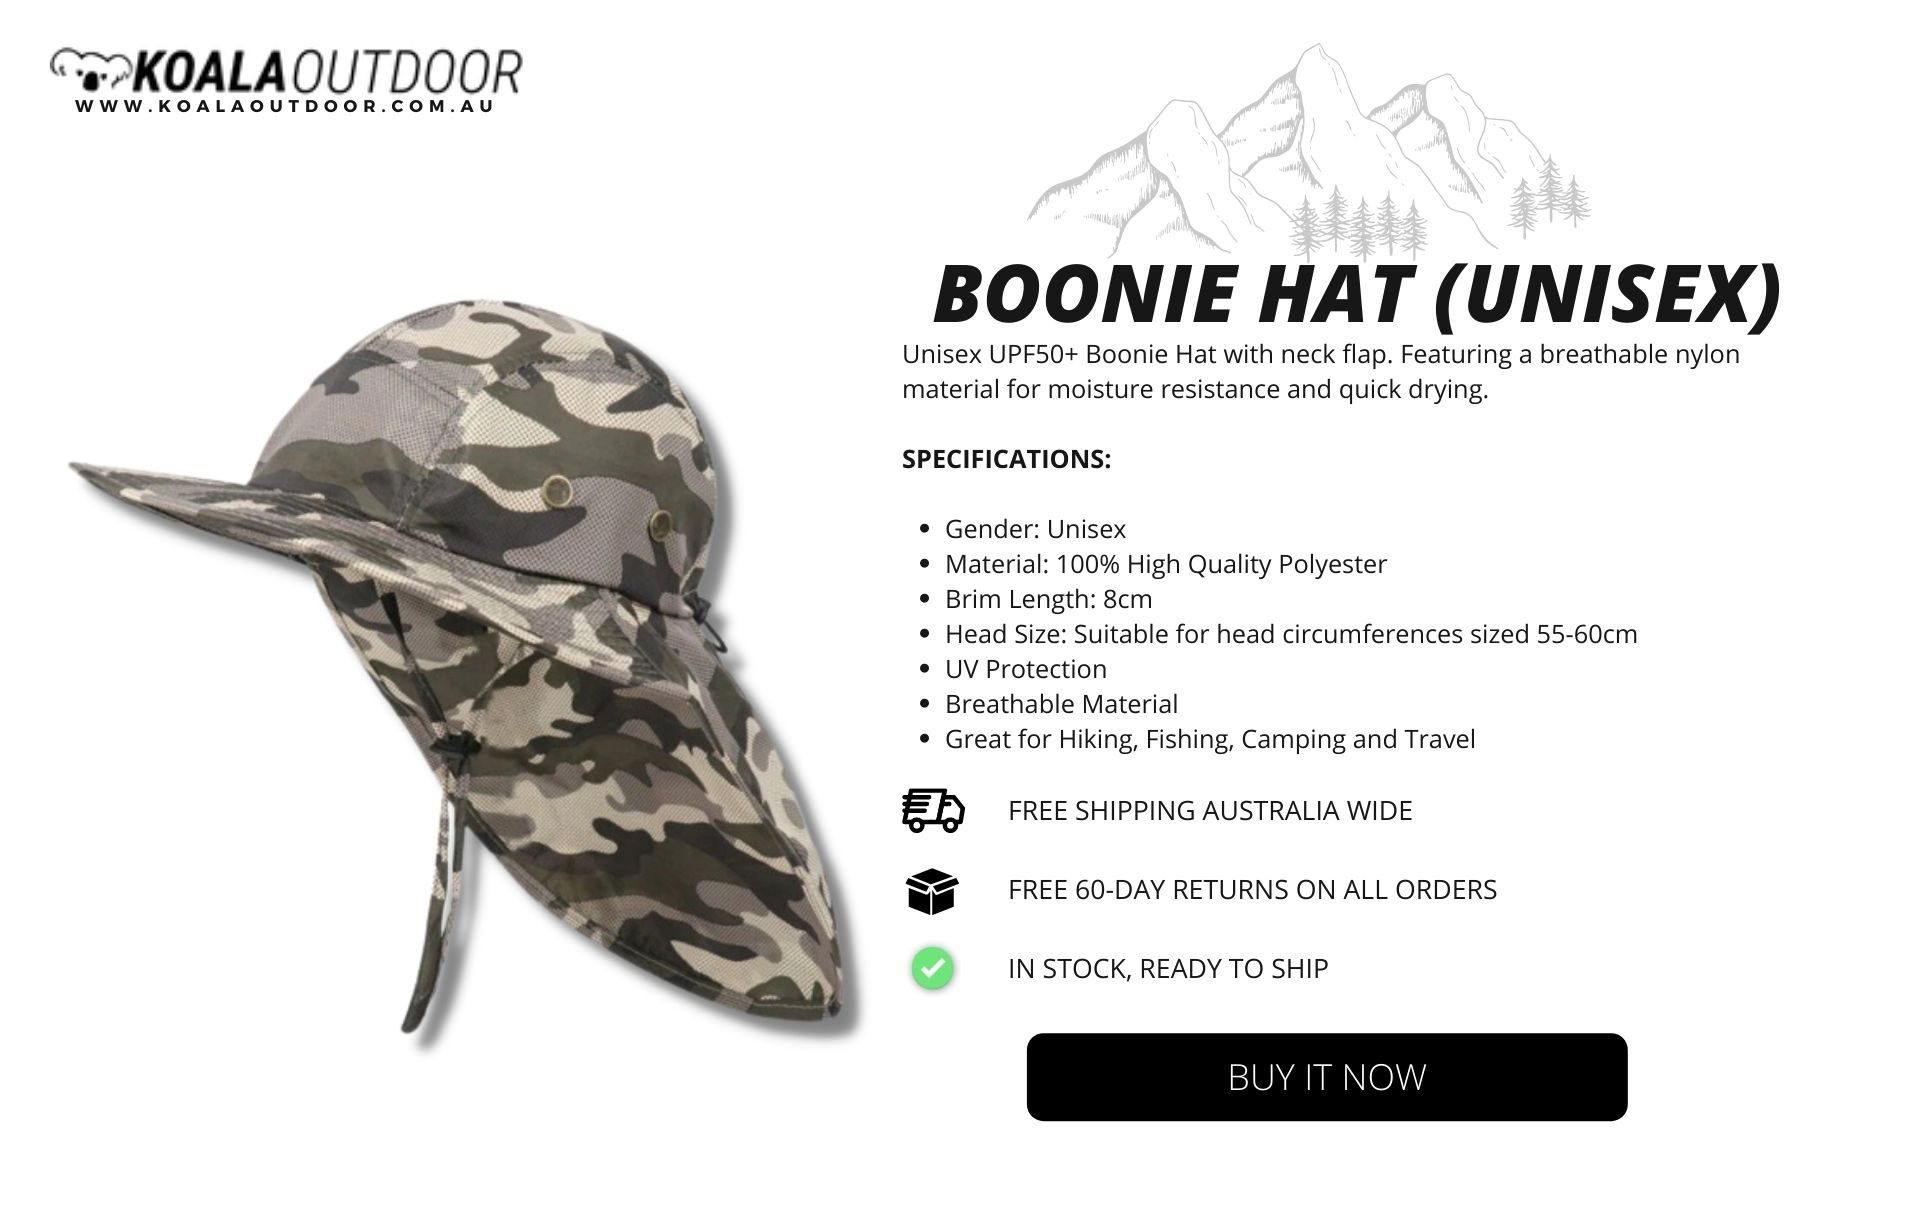 Why you need a Boonie Hat for Sun Protection